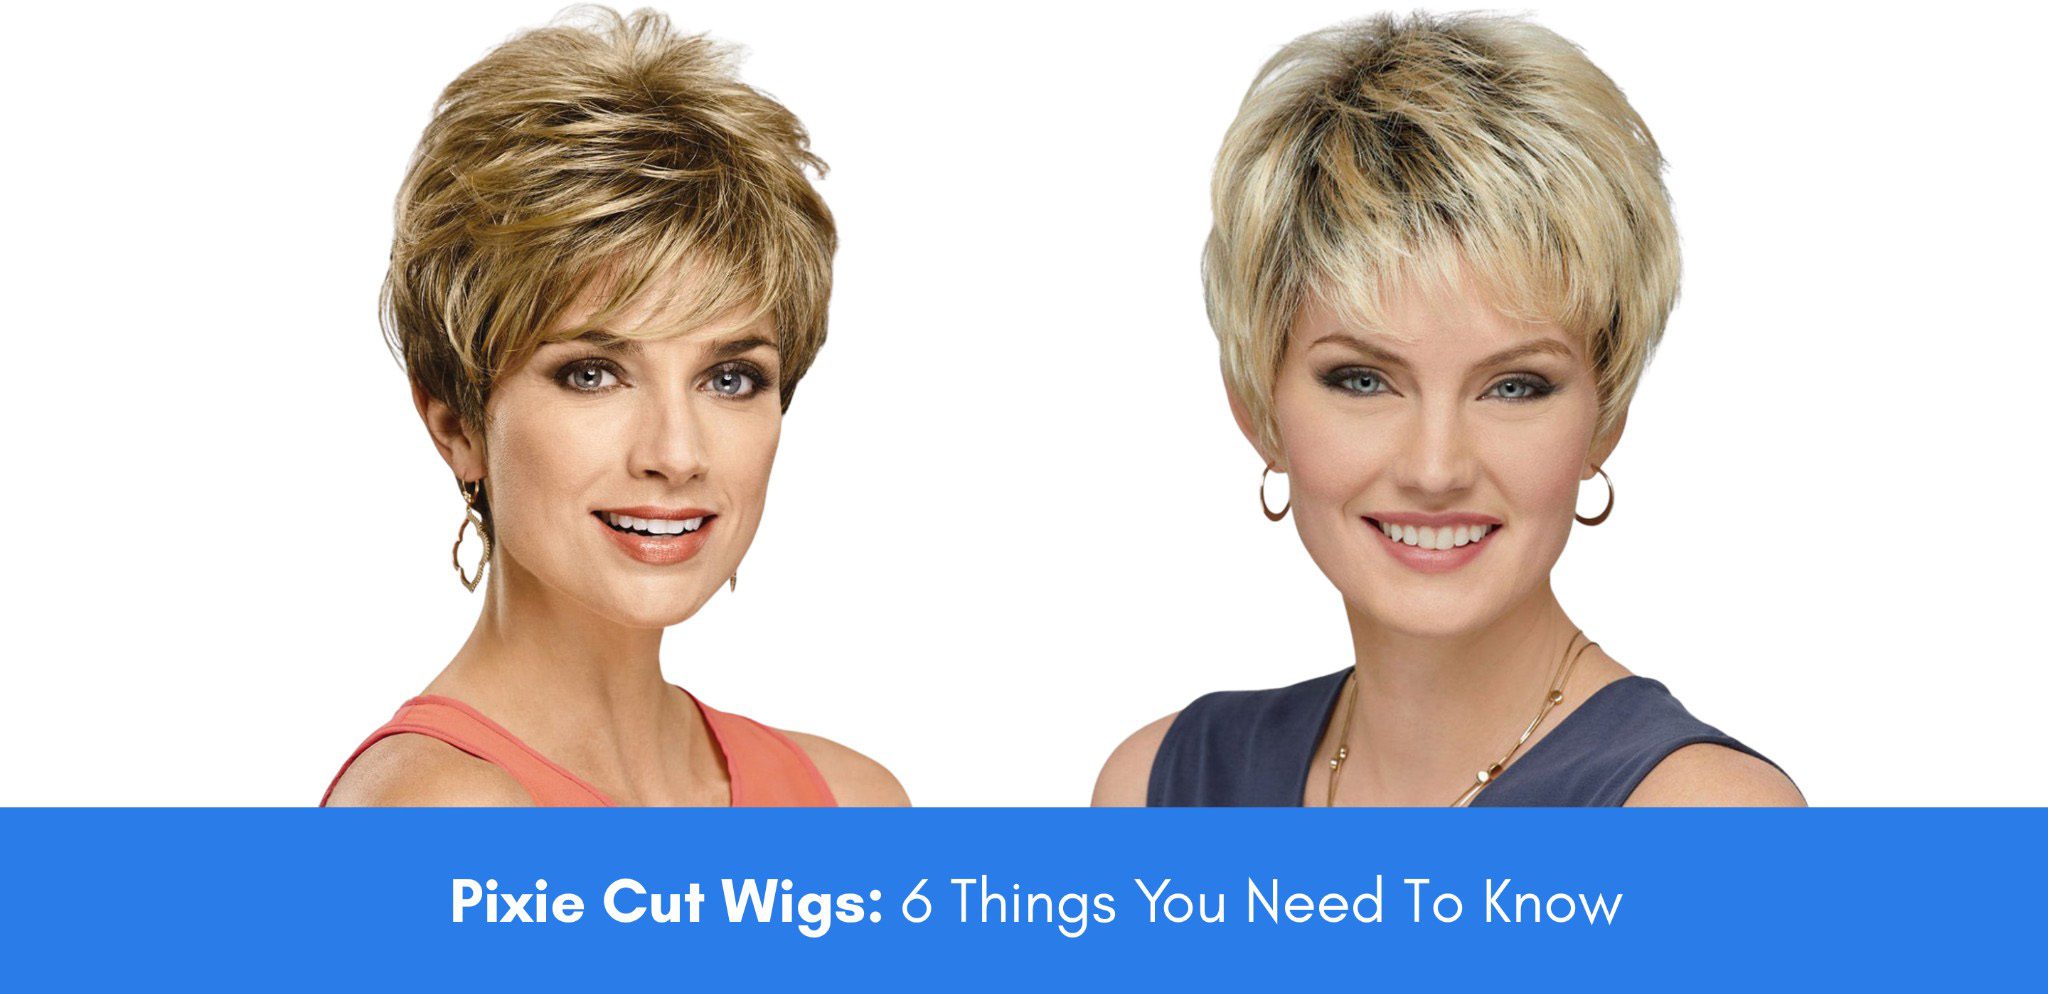 Pixie Cut Wigs: 6 Things You Need To Know